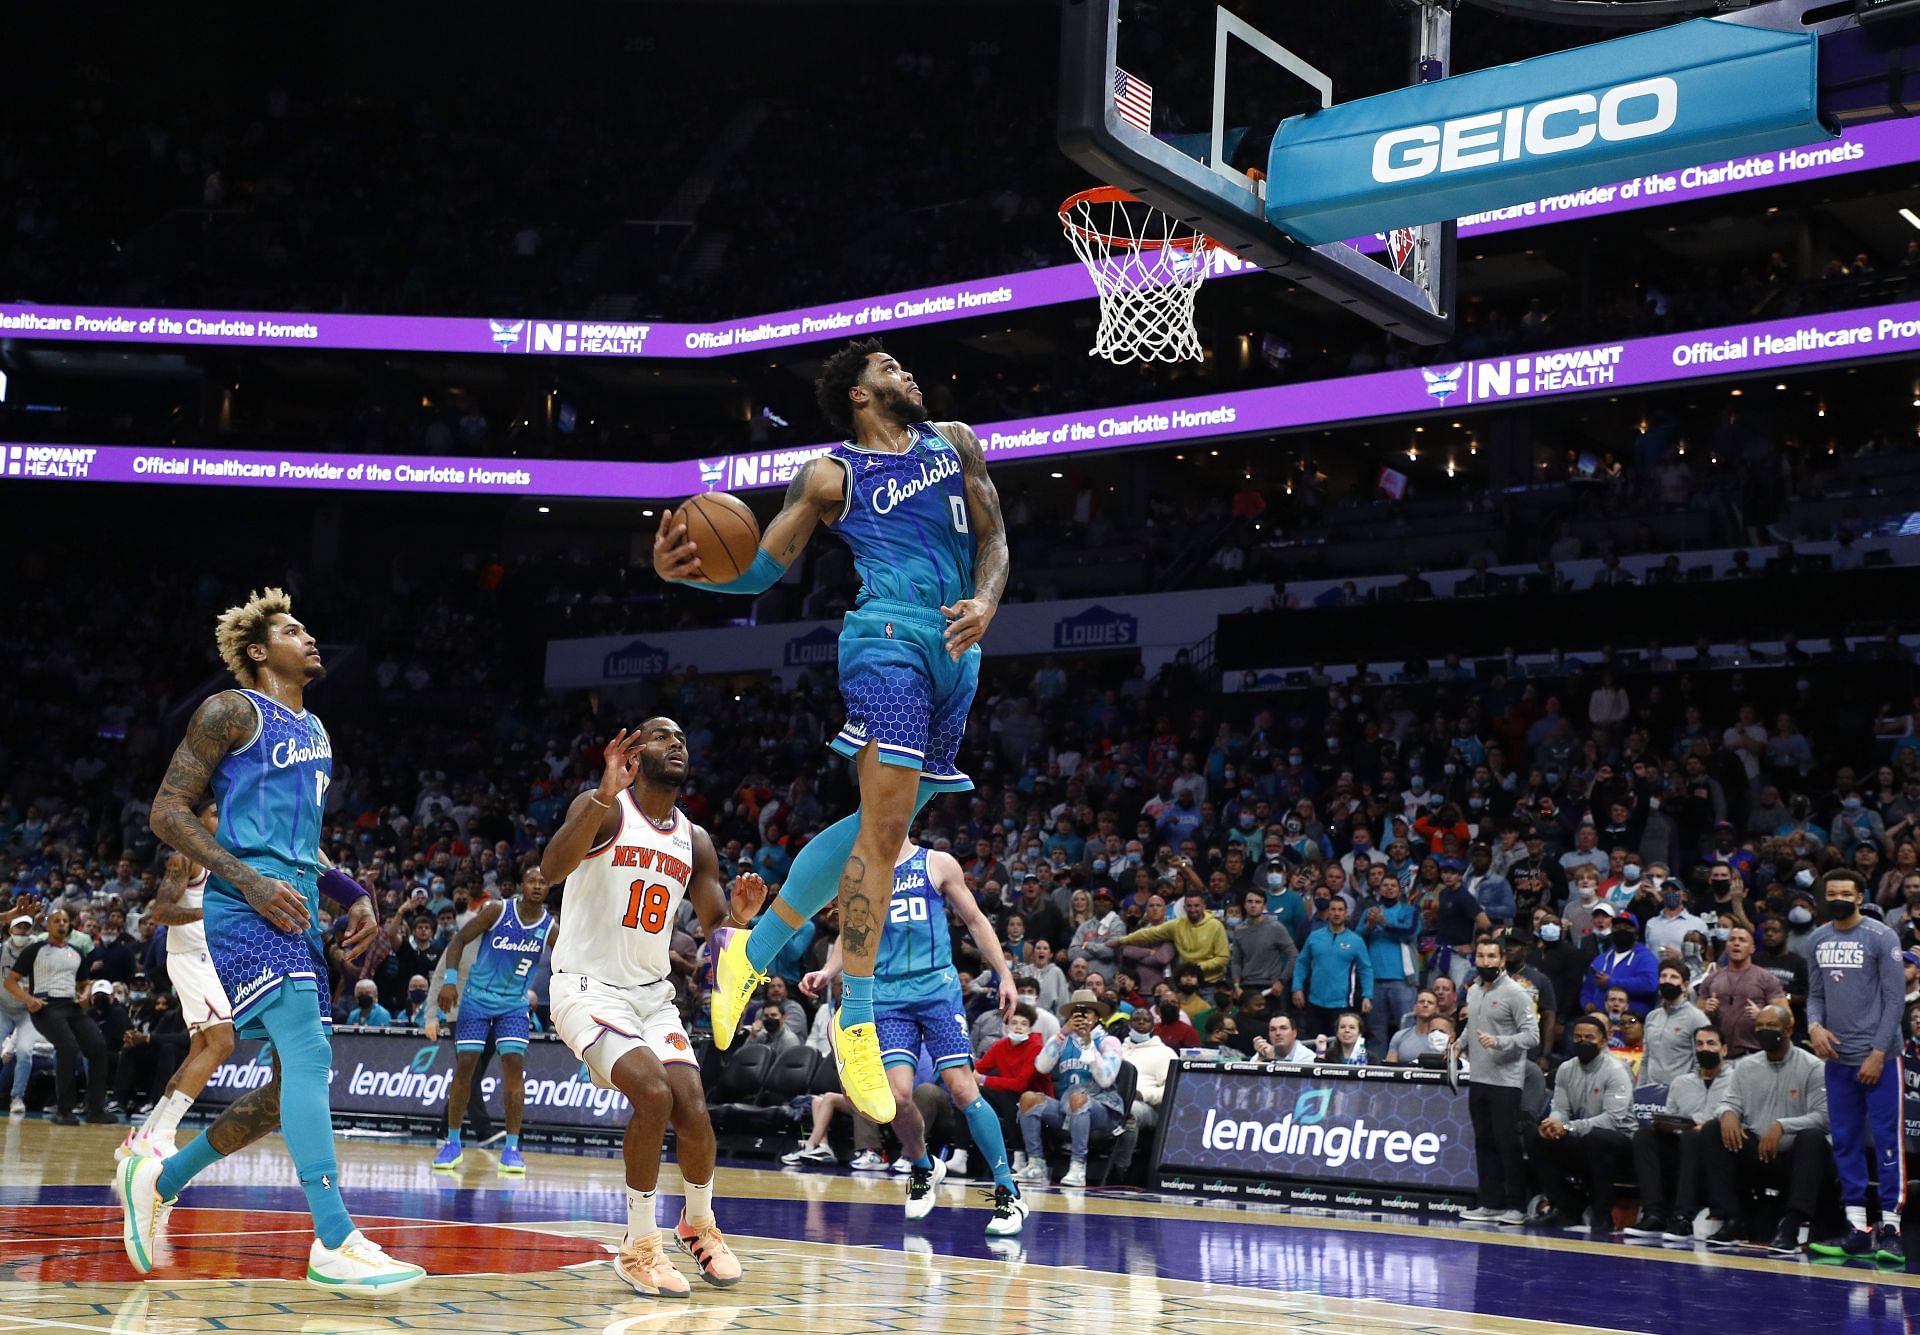 The New York Knicks will host the Charlotte Hornets on January 17th